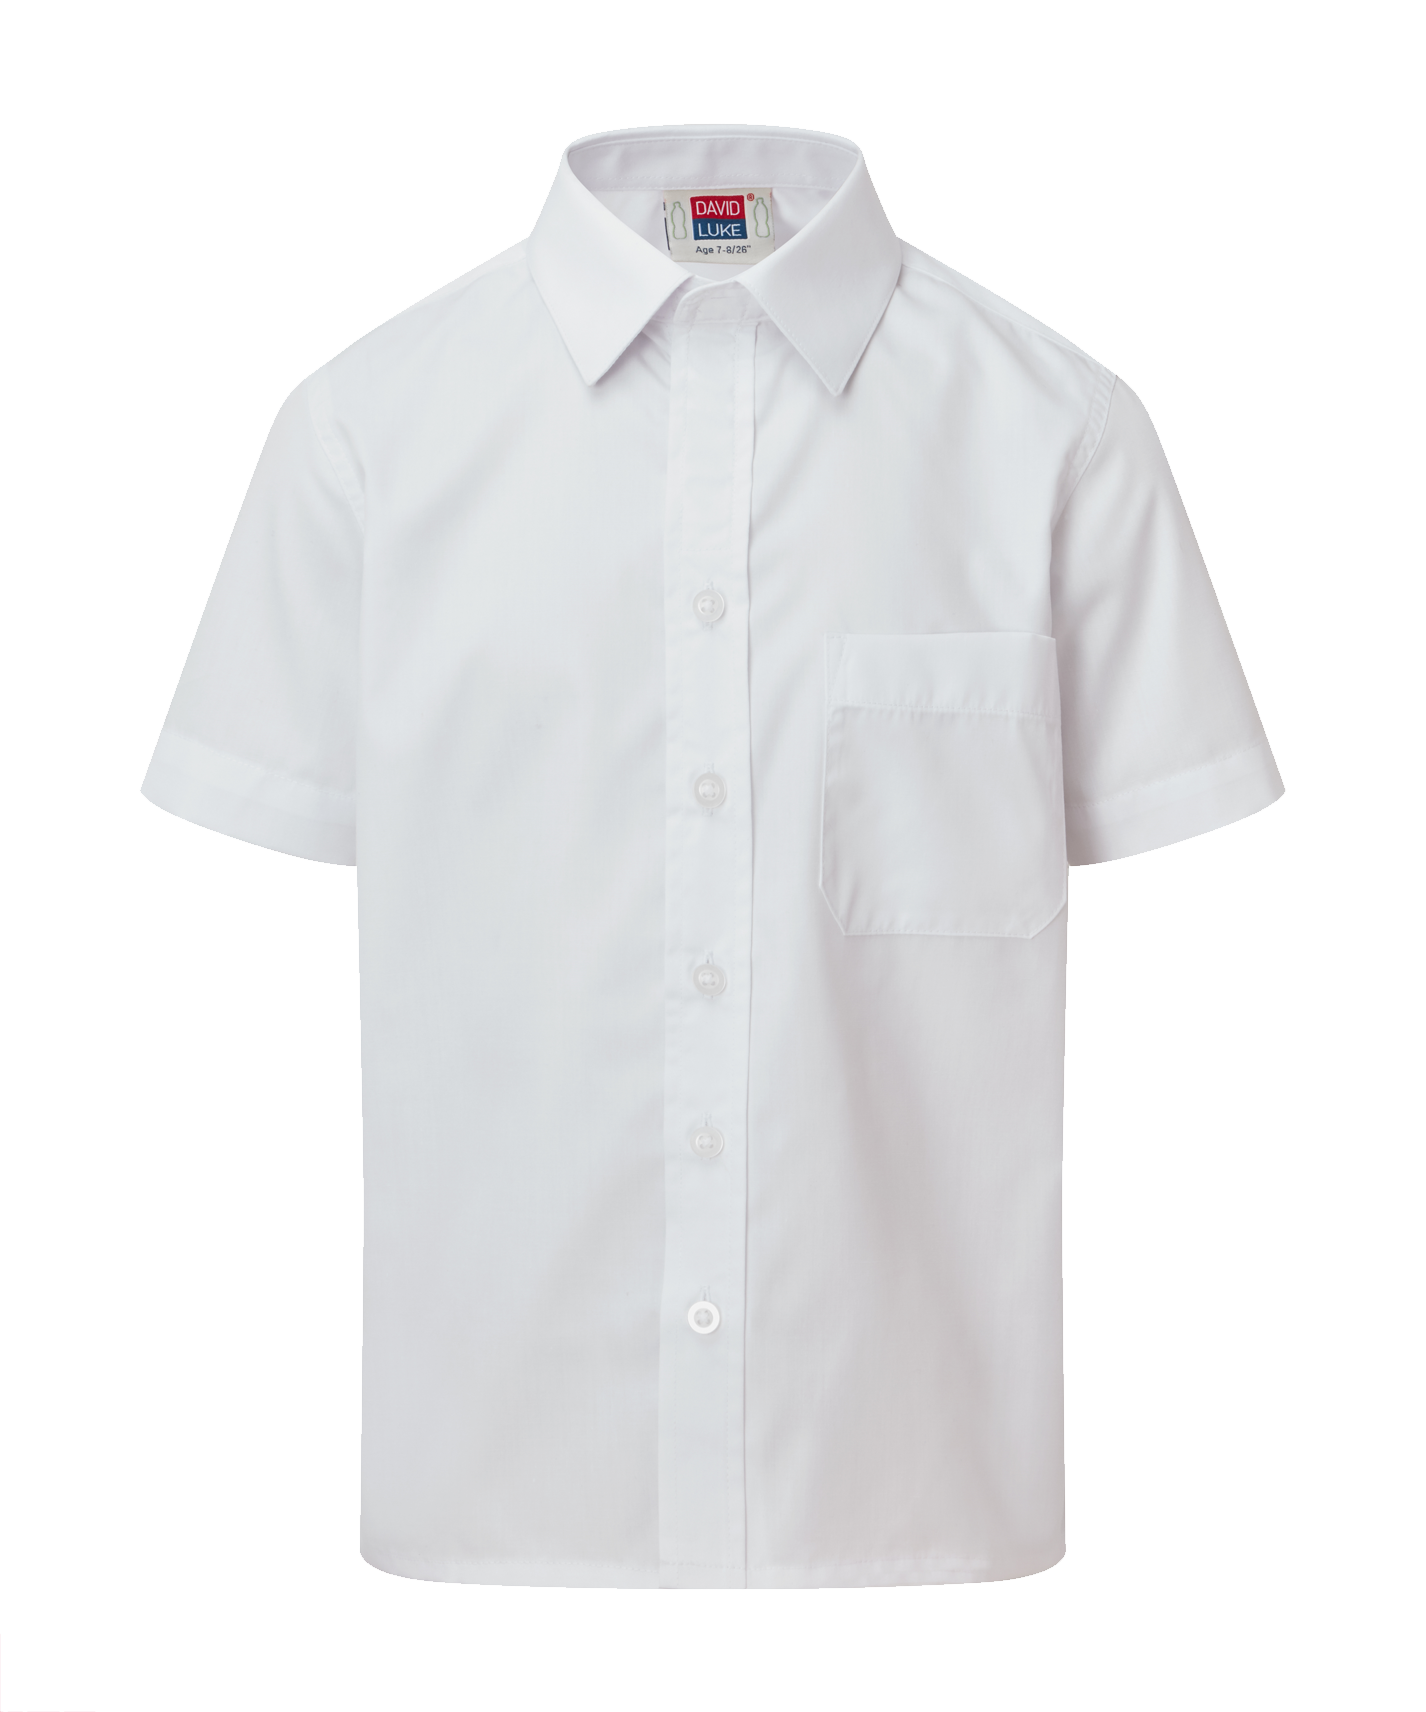 Smart school shirts twin pack with easy fastening velcro top buttons in white.